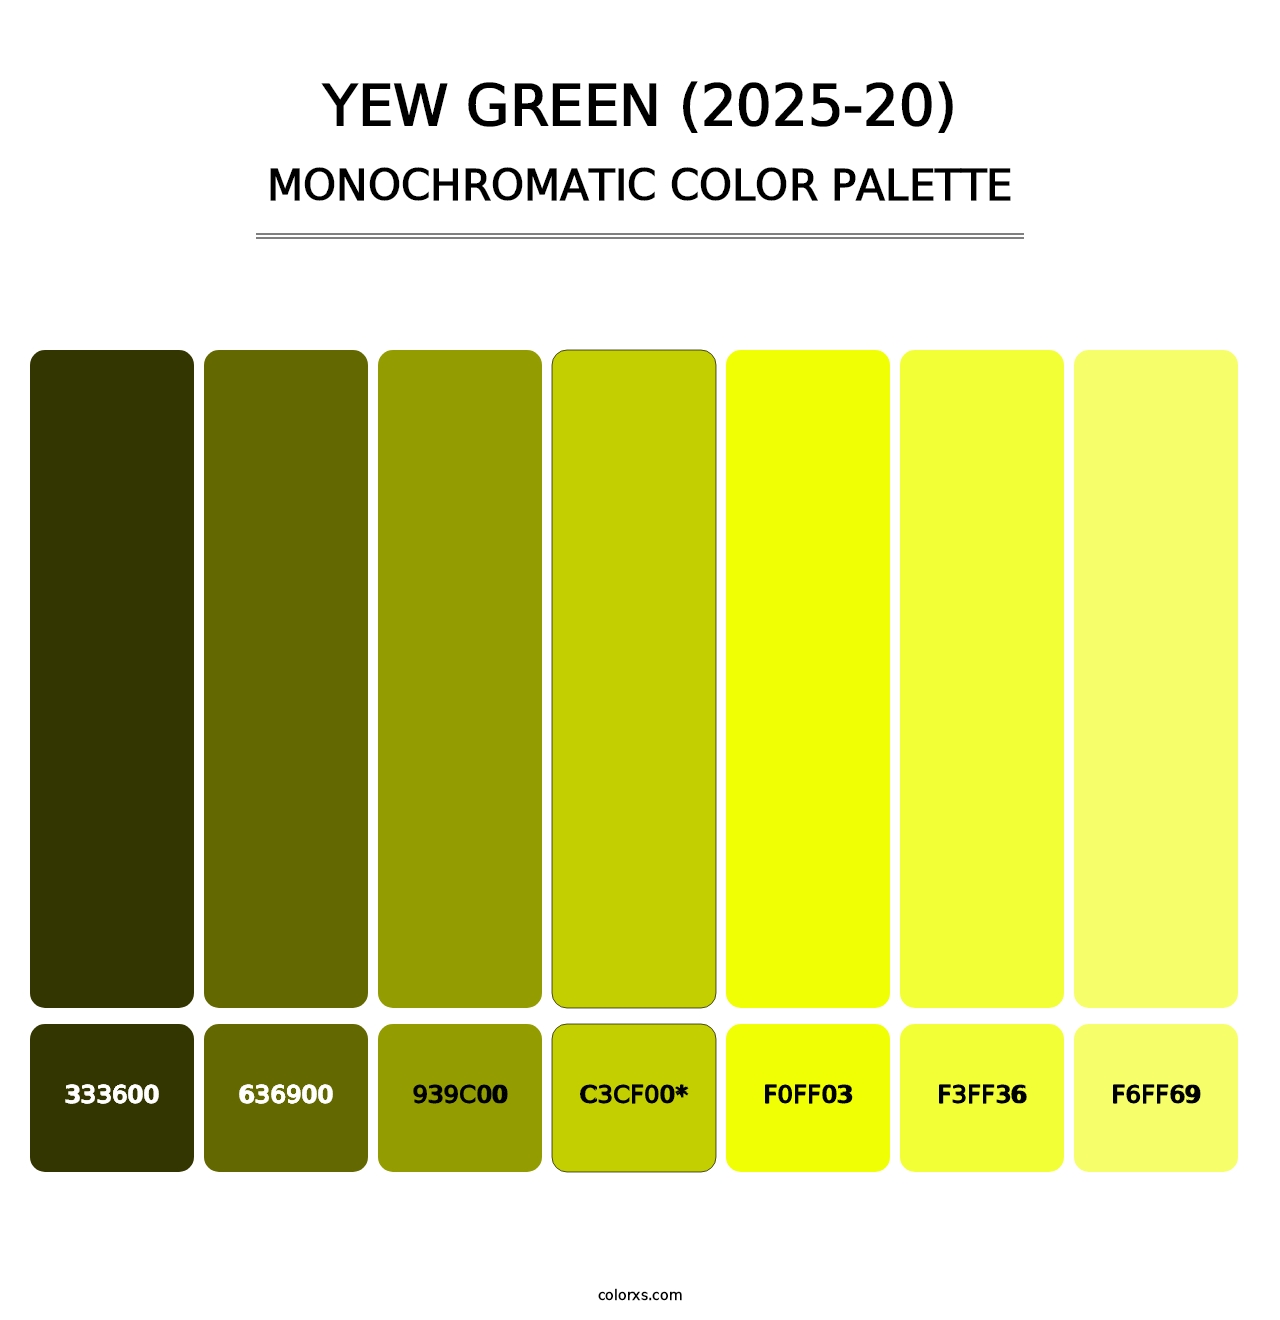 Yew Green (2025-20) - Monochromatic Color Palette